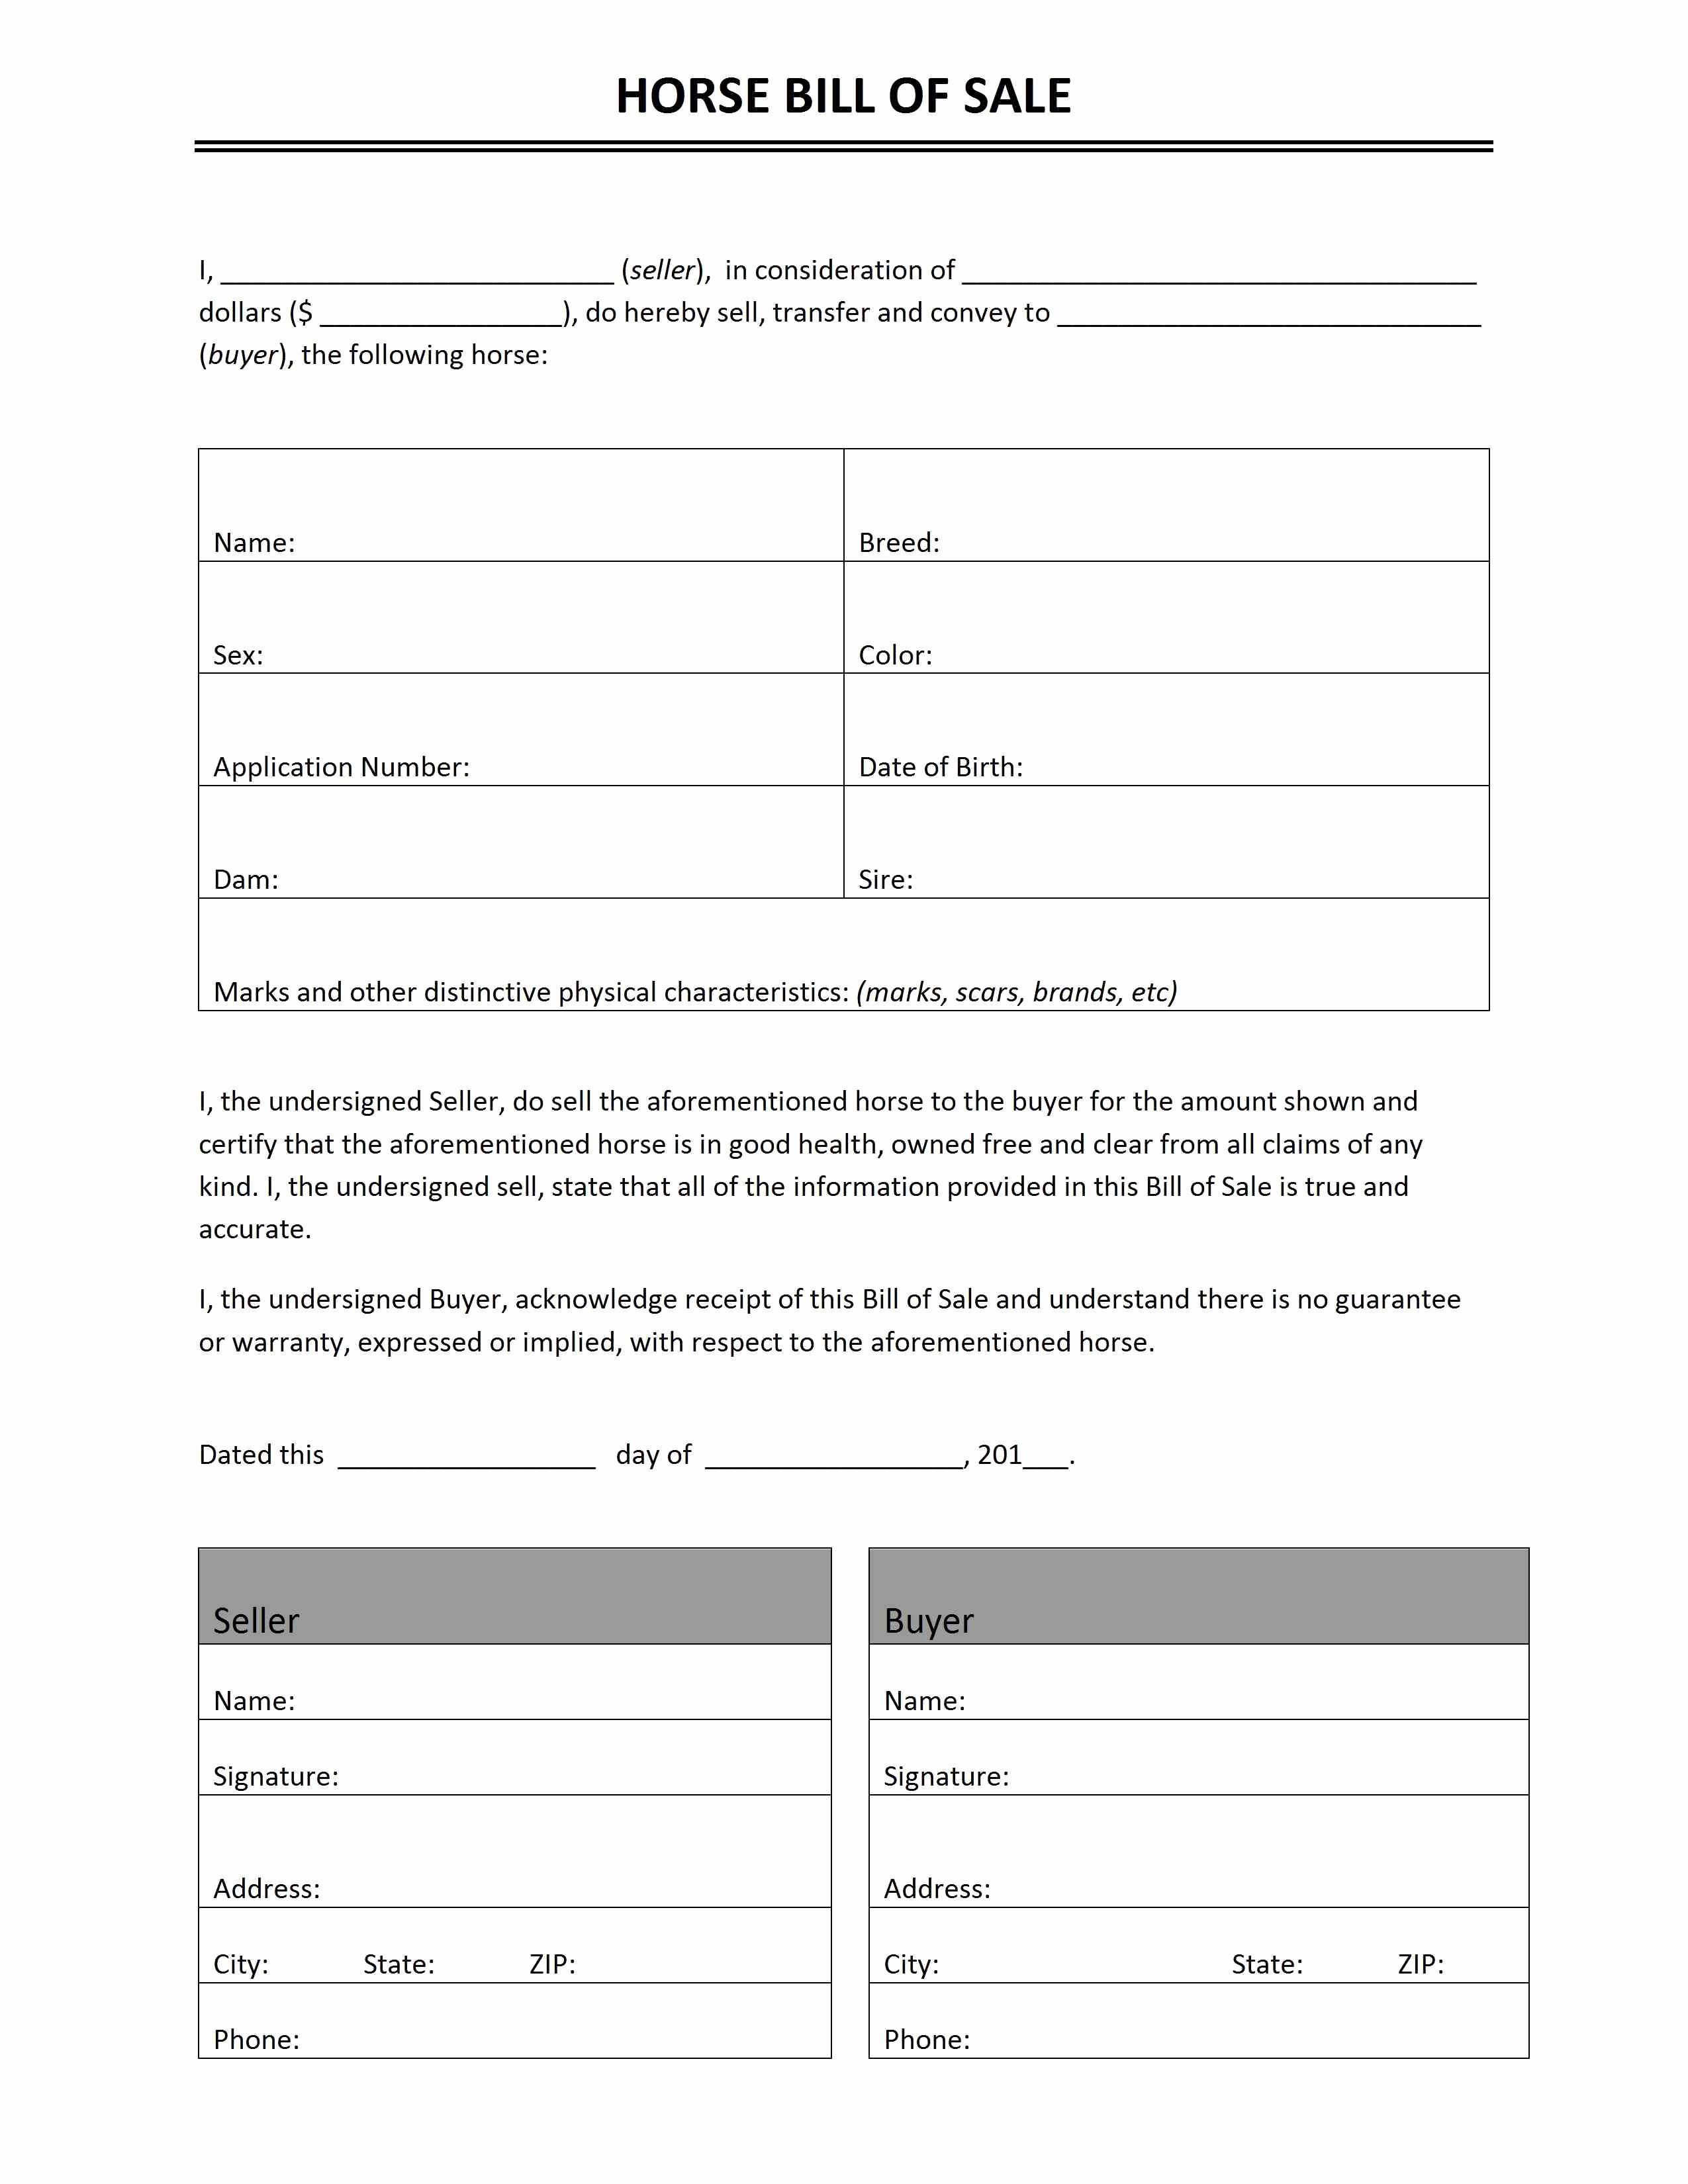 Horse Bill Of Sale form Awesome Horse Bill Of Sale Template